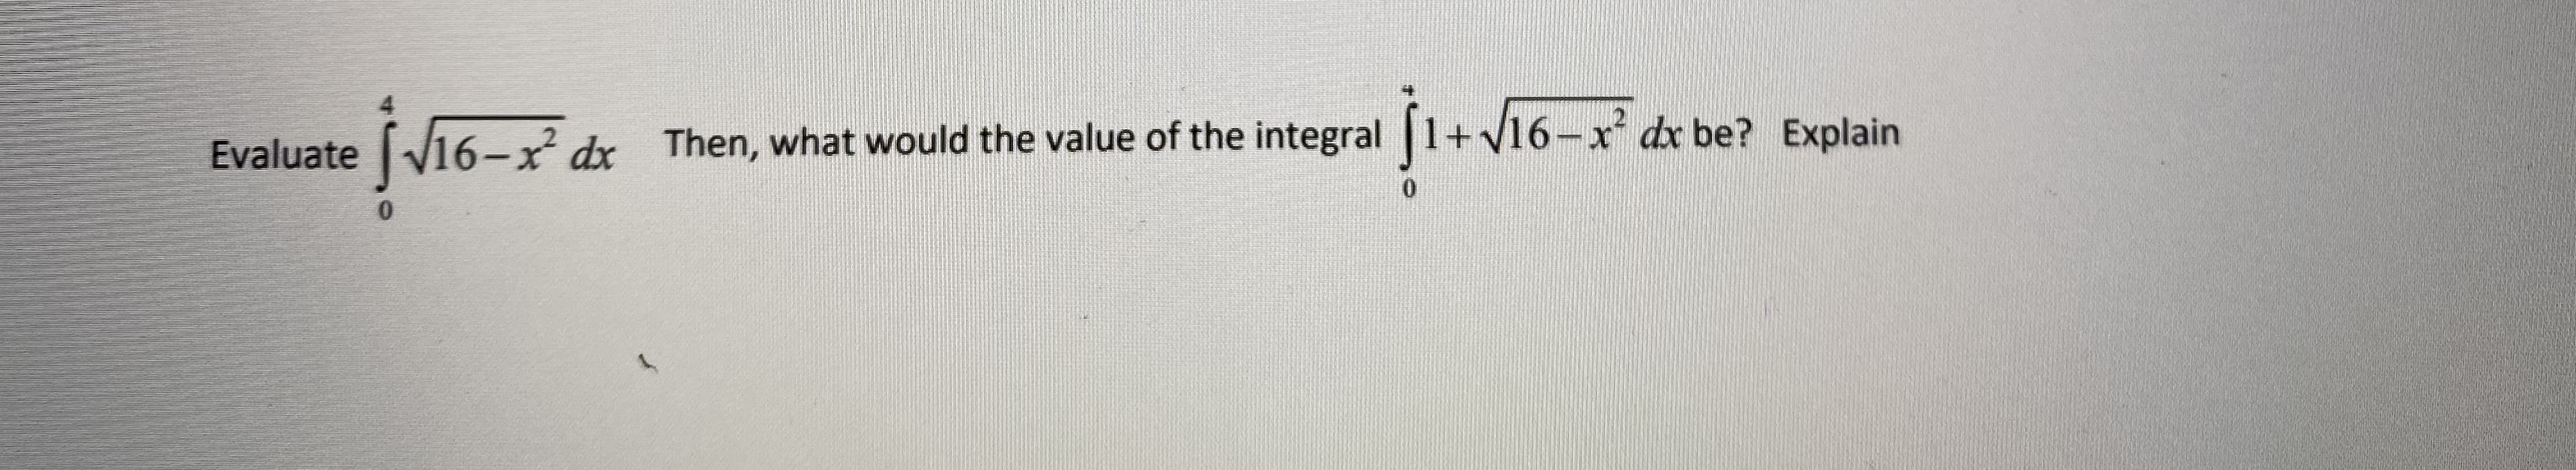 Evaluate V16-x² dx dx be? Explain
Then, what would the value of the integral 1+V16-x
0.
